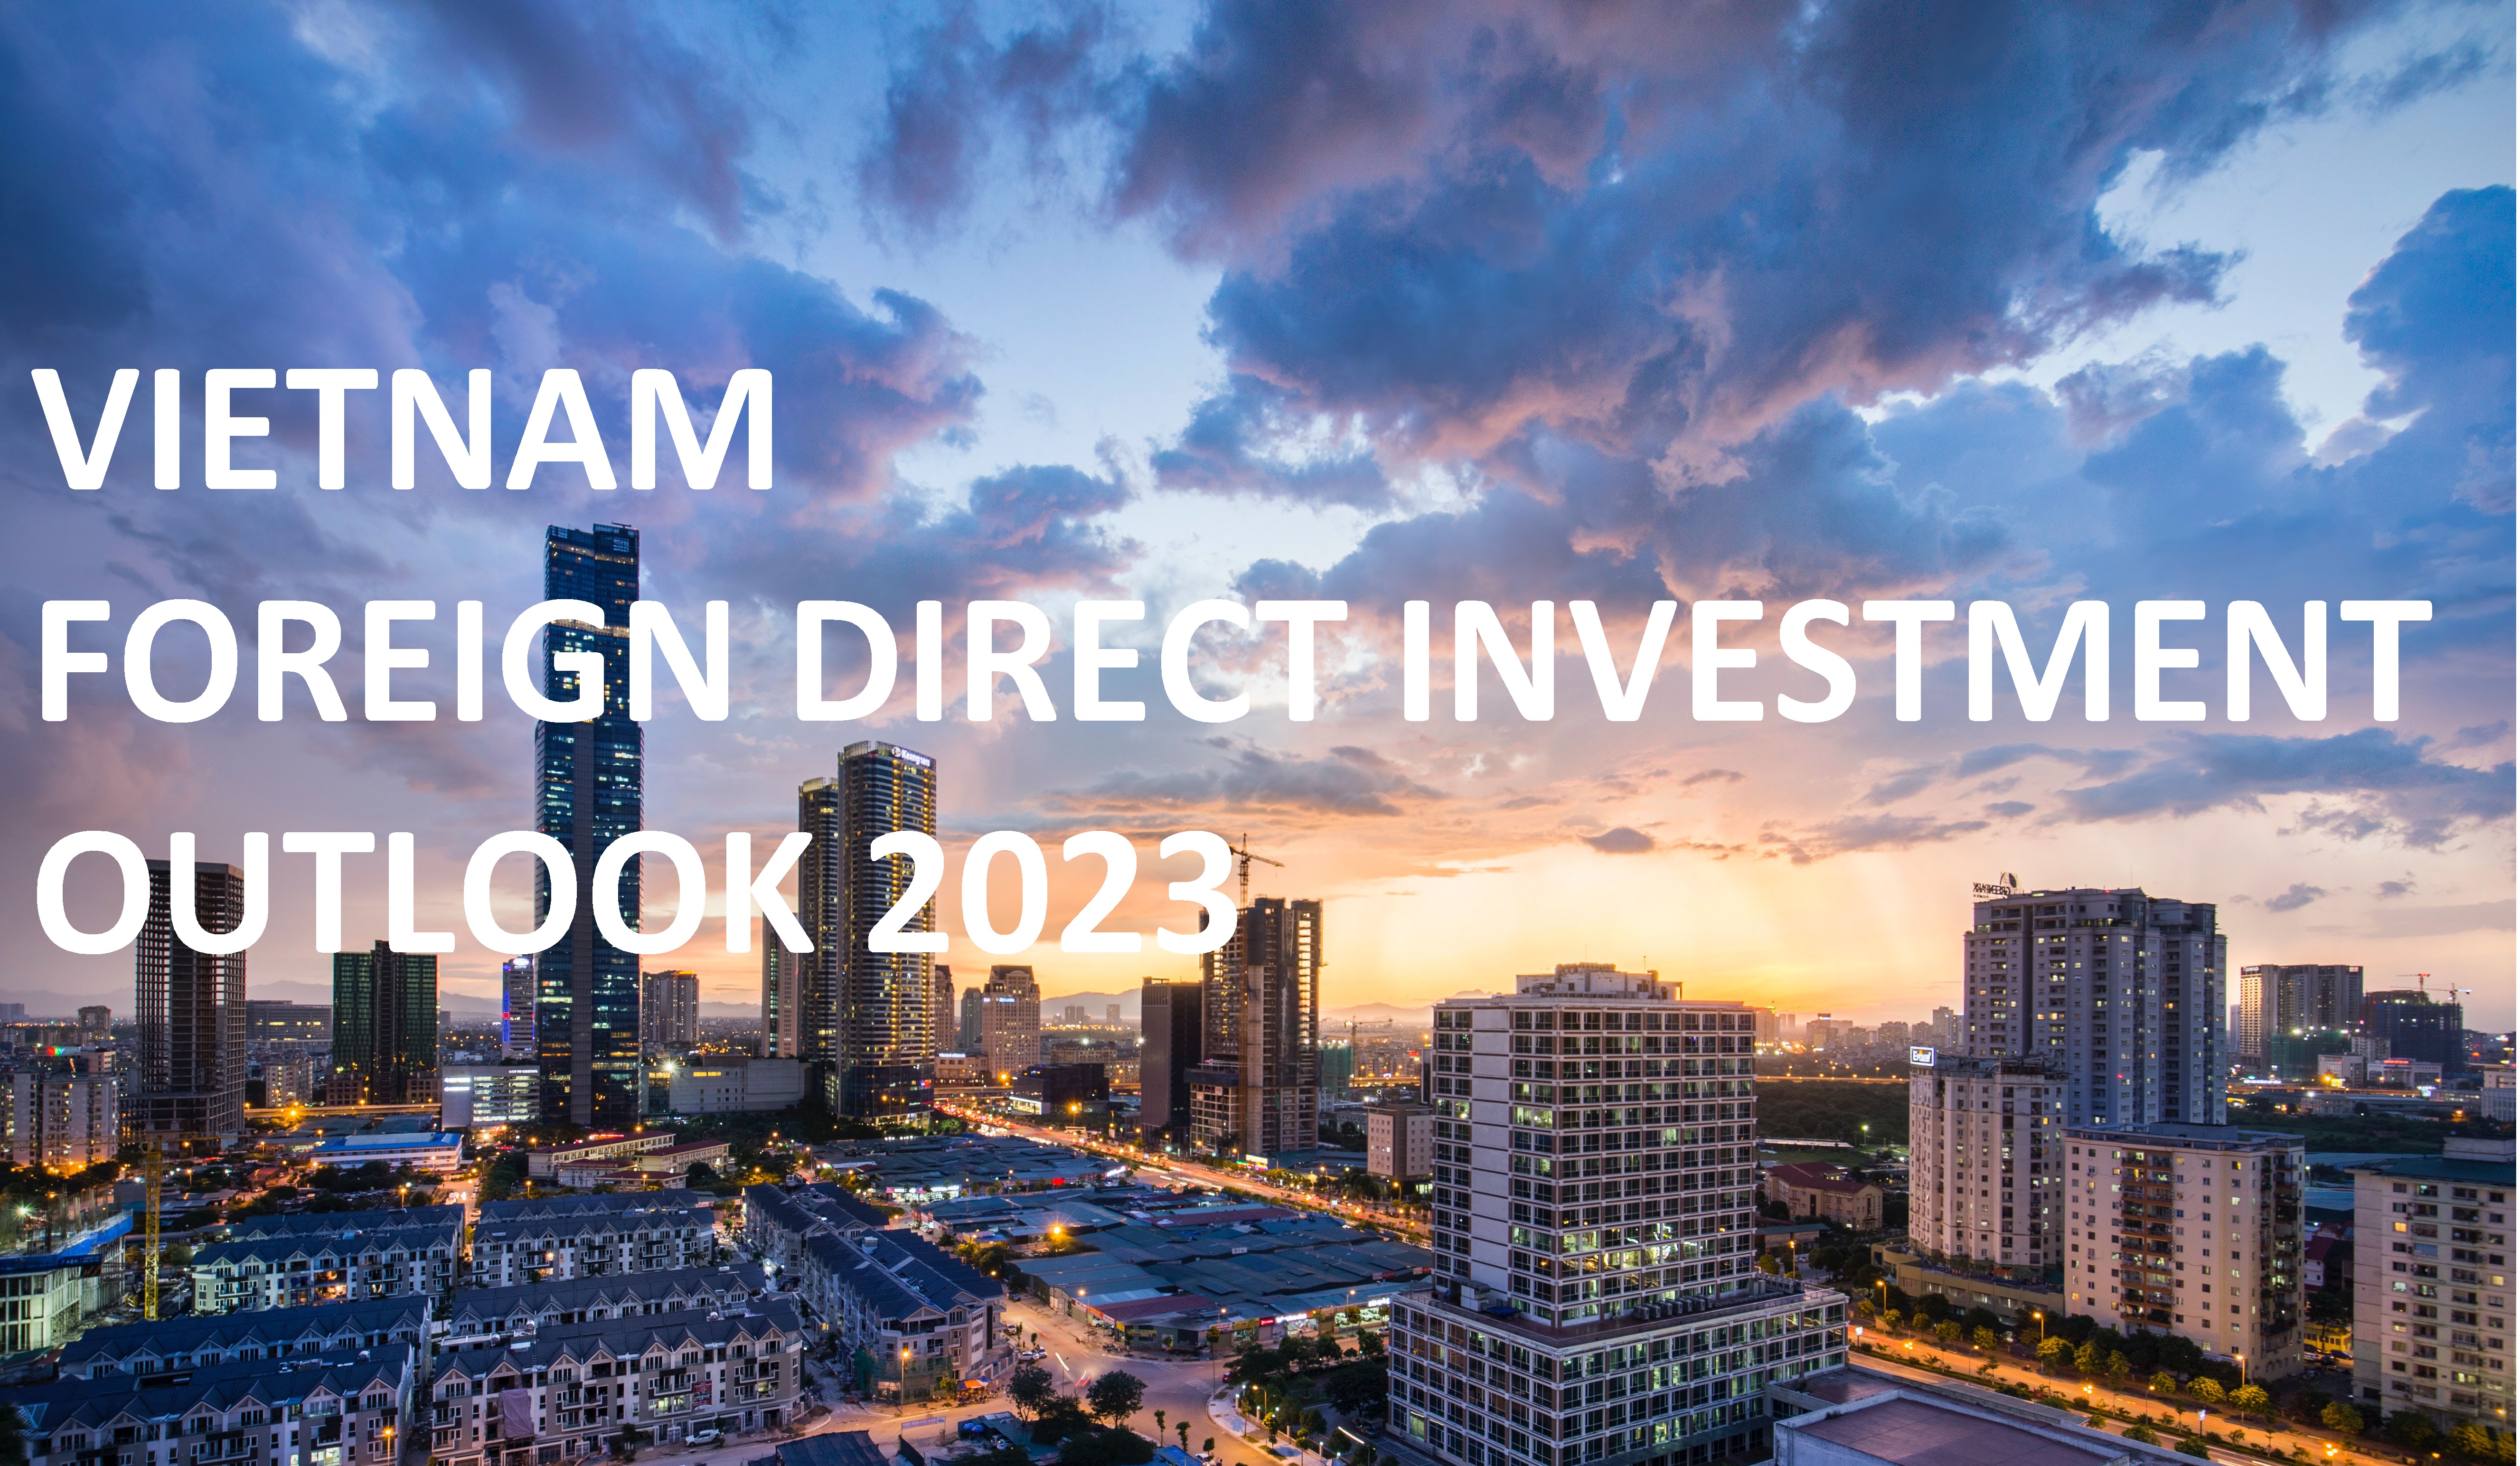 Vietnam Foreign Direct Investment Outlook 2023